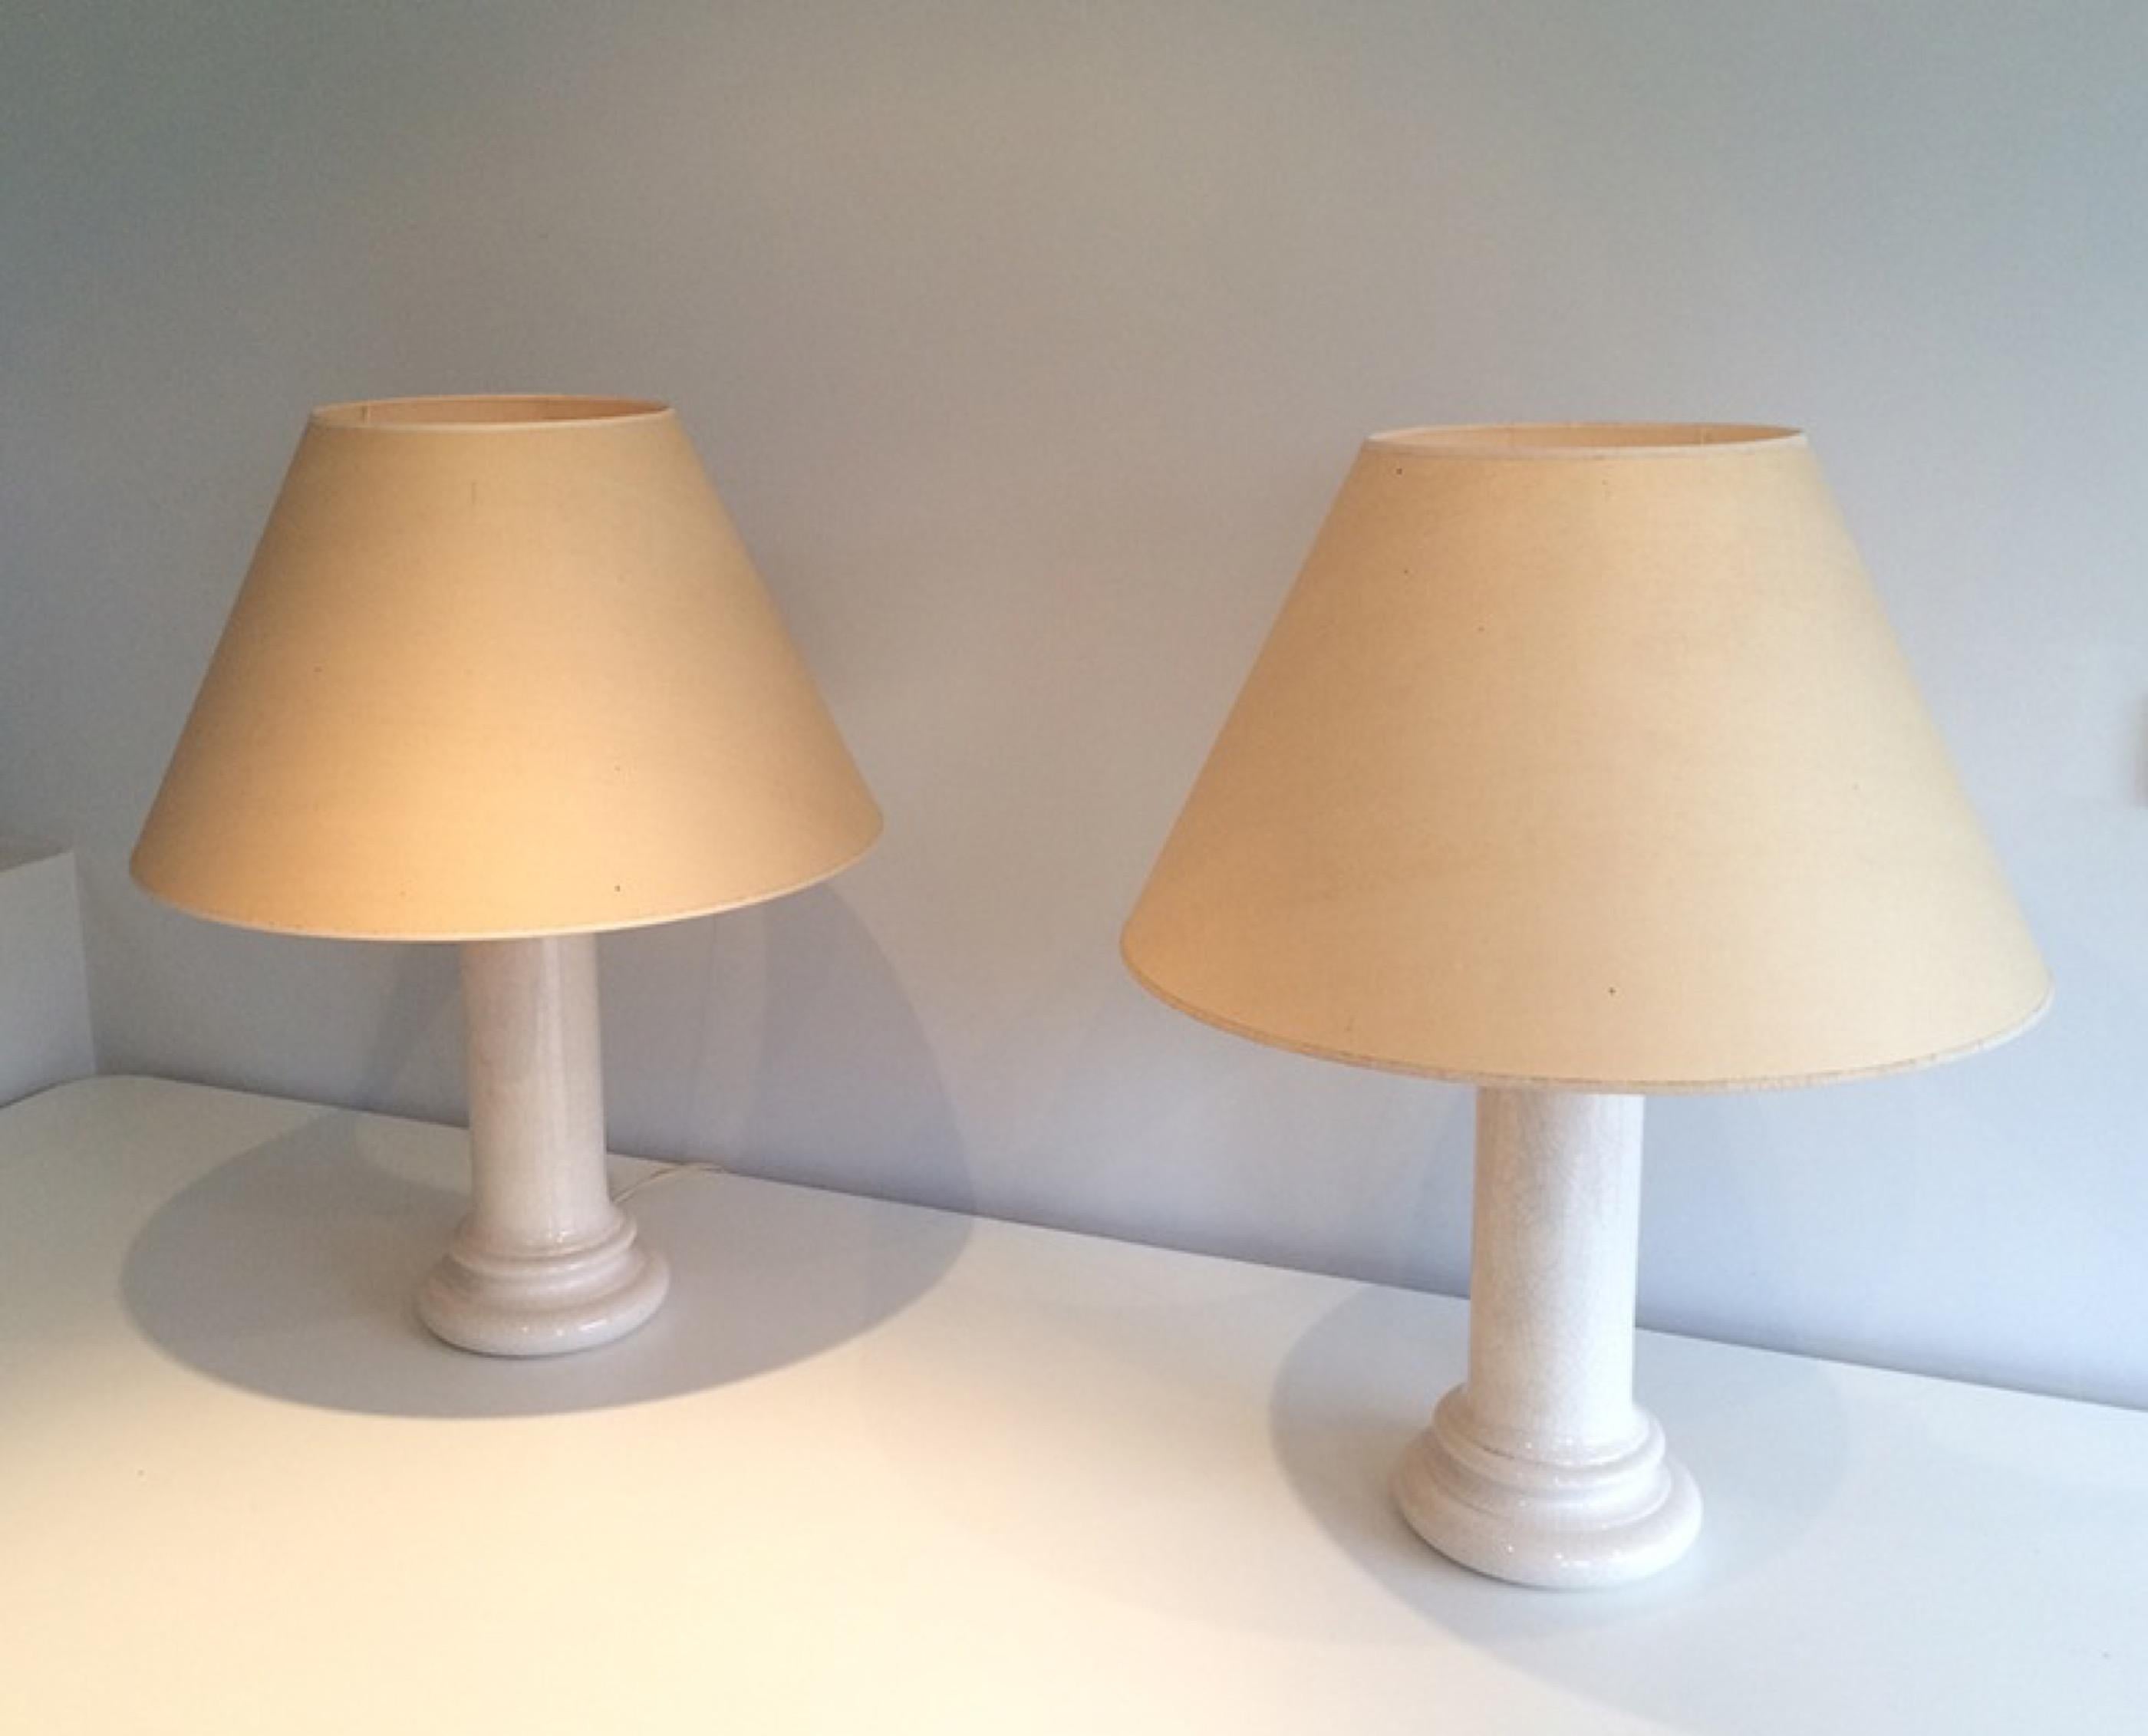 Pair of White Cracked Ceramic Lamps, circa 1970 For Sale 2